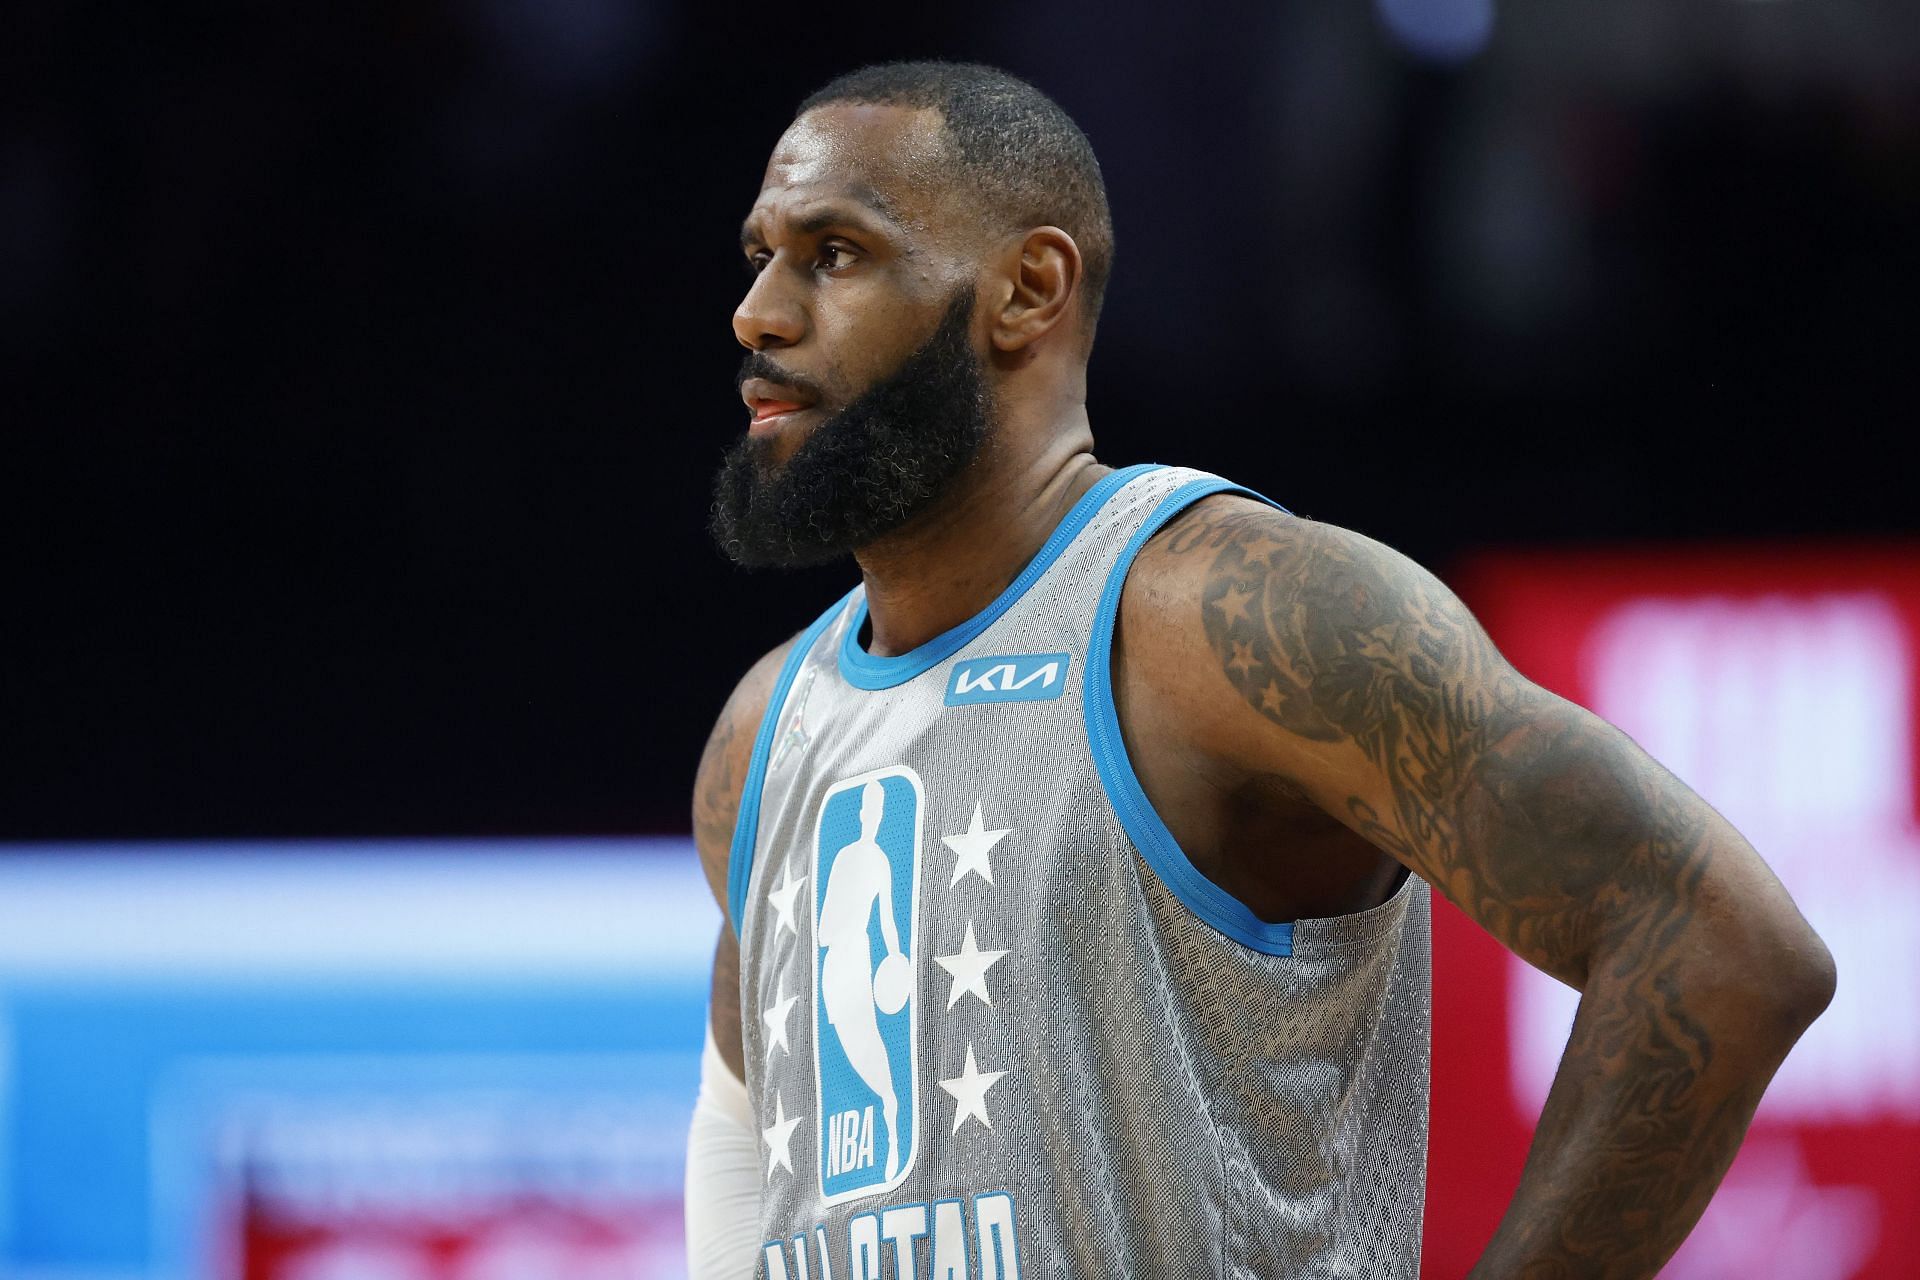 “LeBron now wears the crown of biggest diva in the history of sports” – Skip Bayless believes LeBron James’ behavior at the All-Star weekend was “incredibly childish, incredibly petty”